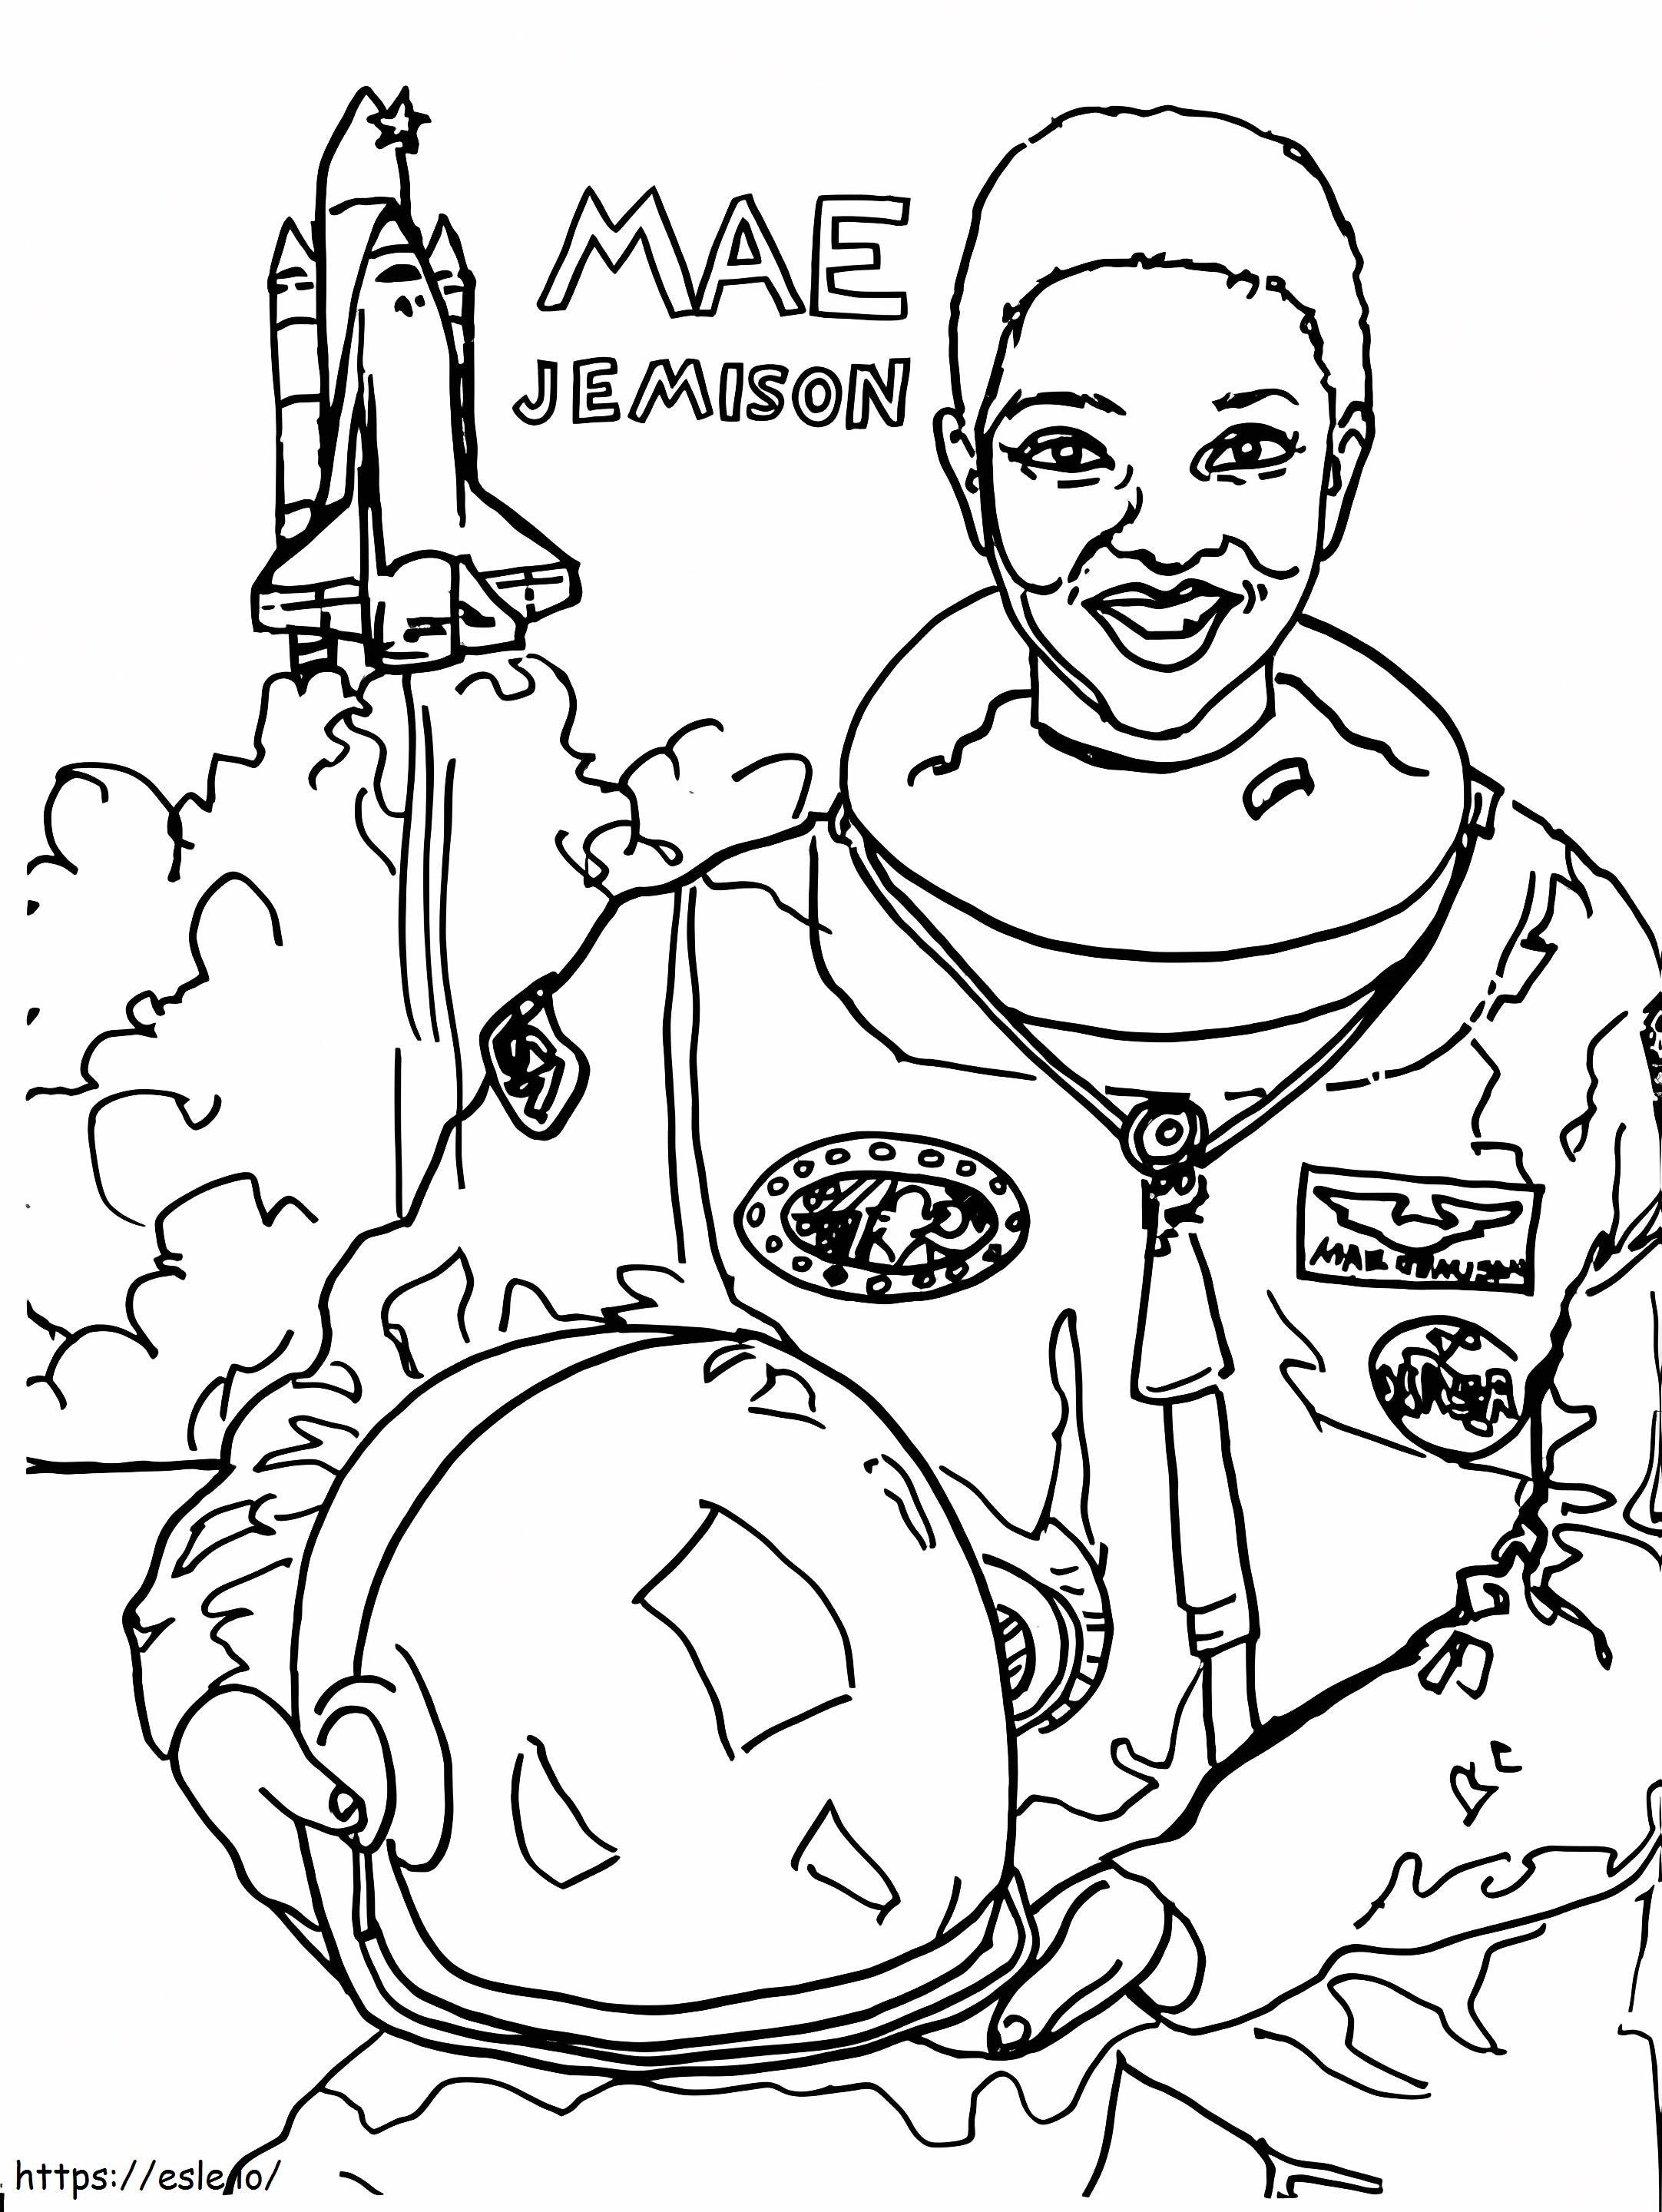 Smiling Mae Jemison coloring page